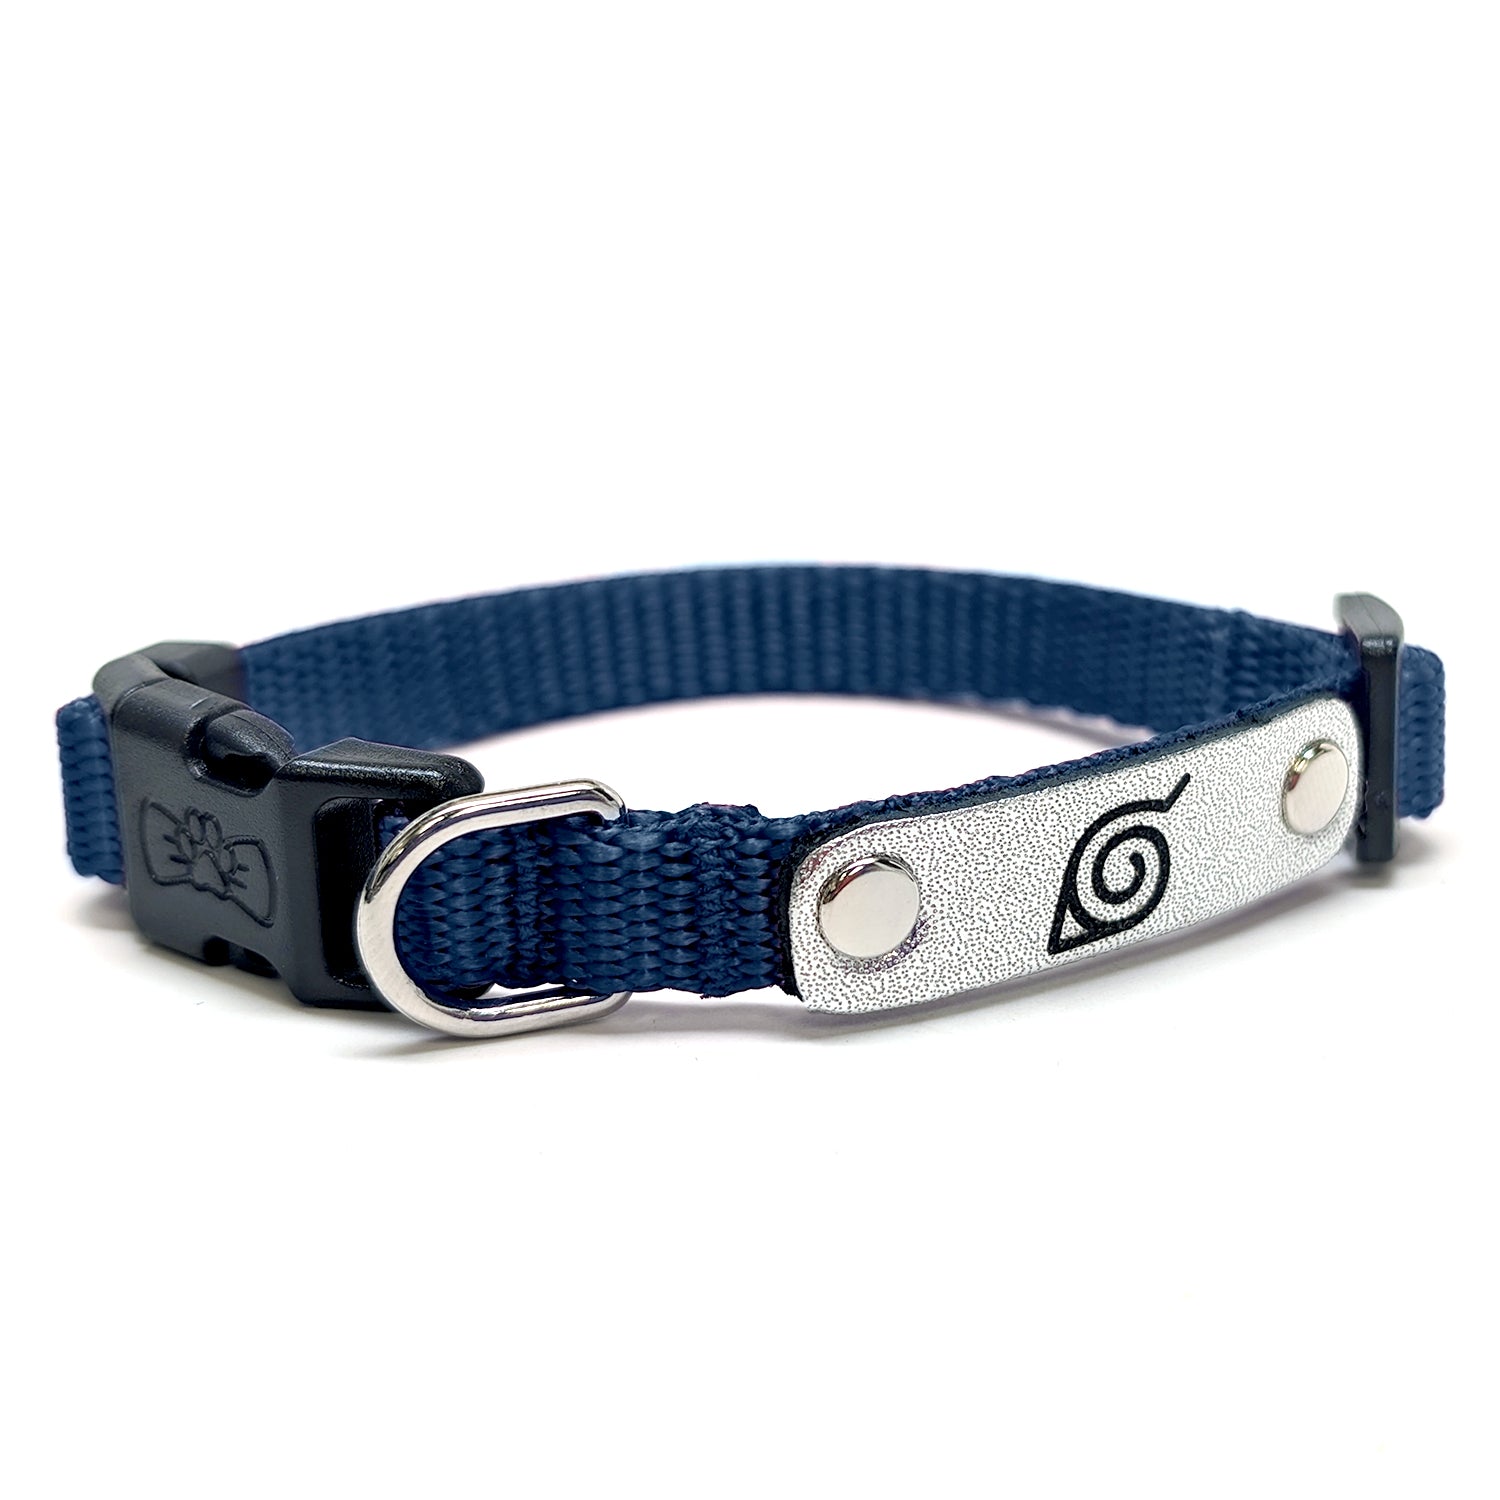 Naruto Shippuden x Pawsonify - Officially Licensed Ninja Collar (Navy) for XS Dogs #size_Dog: (XS) 8.5-12